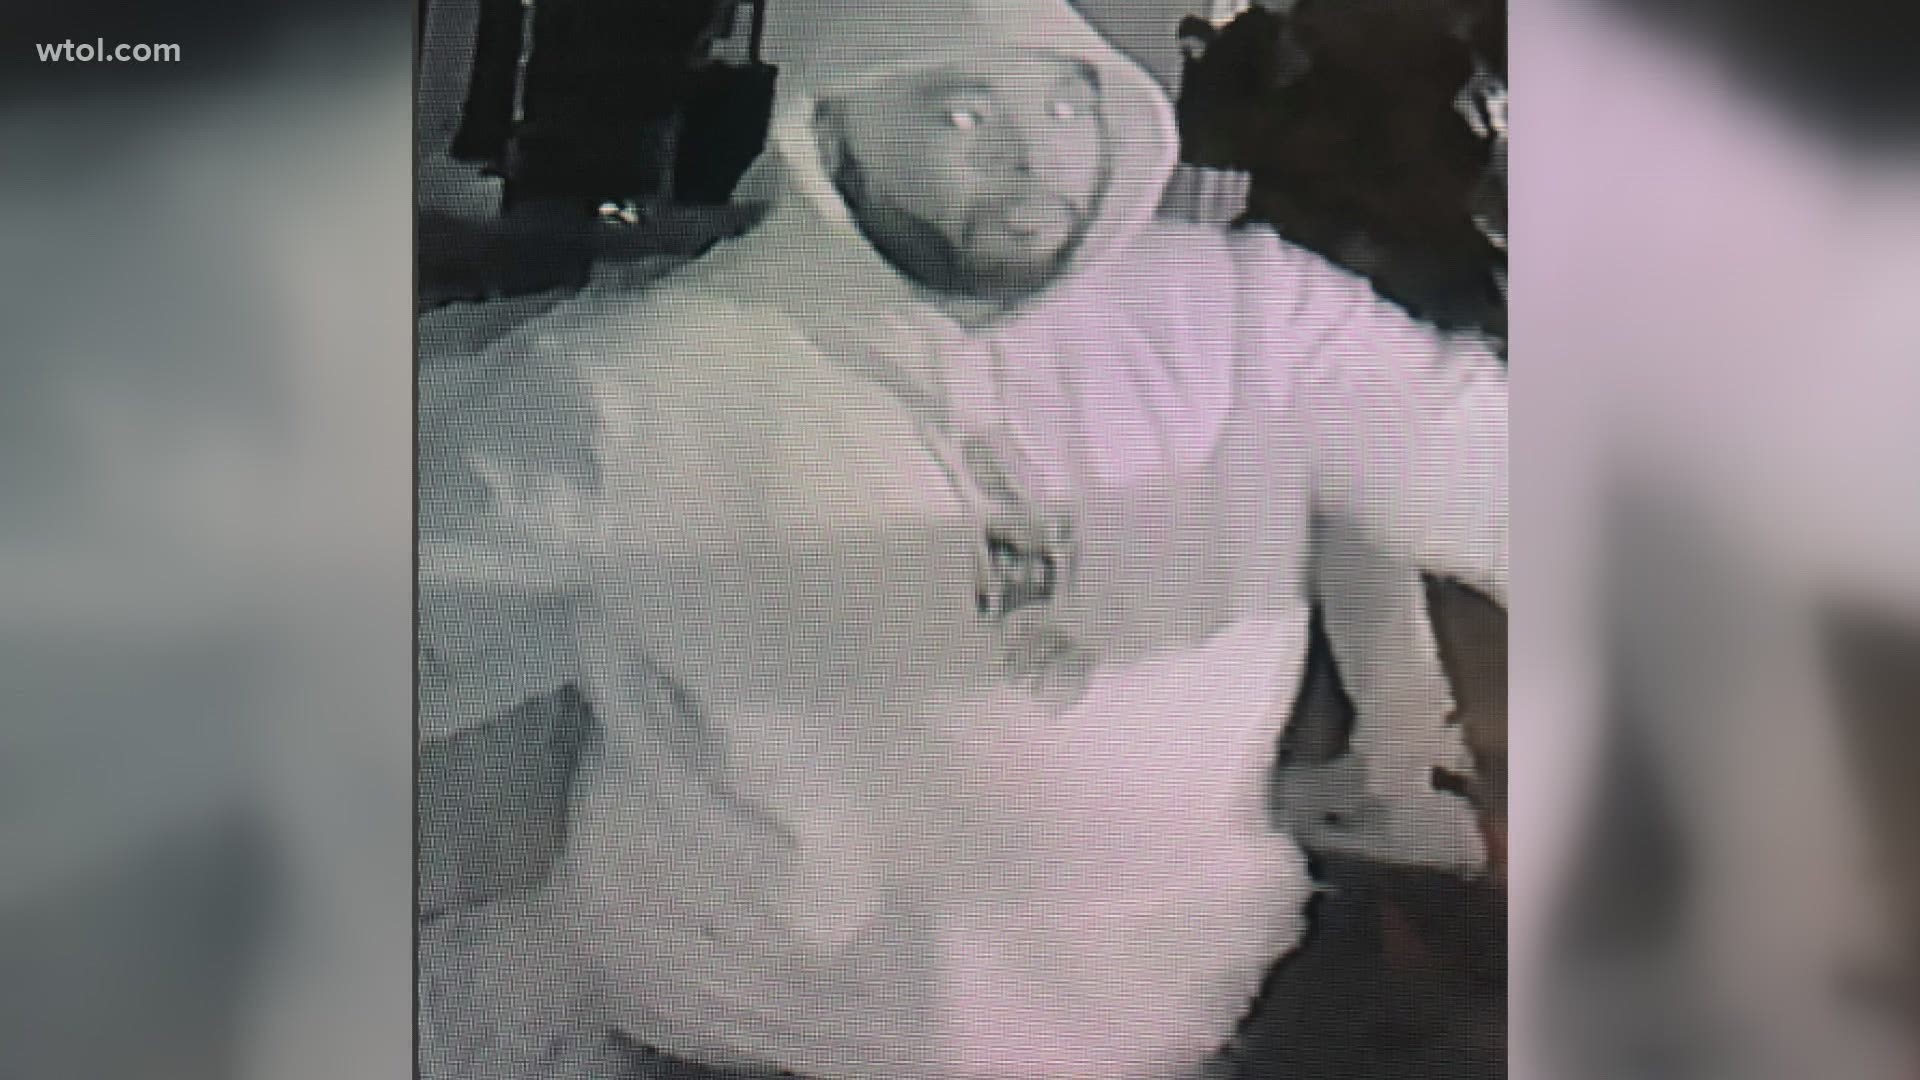 If you recognize the man pictured, or have any information about the incident, you are asked to call Detective Jeff Hooper at 734-224-7316.